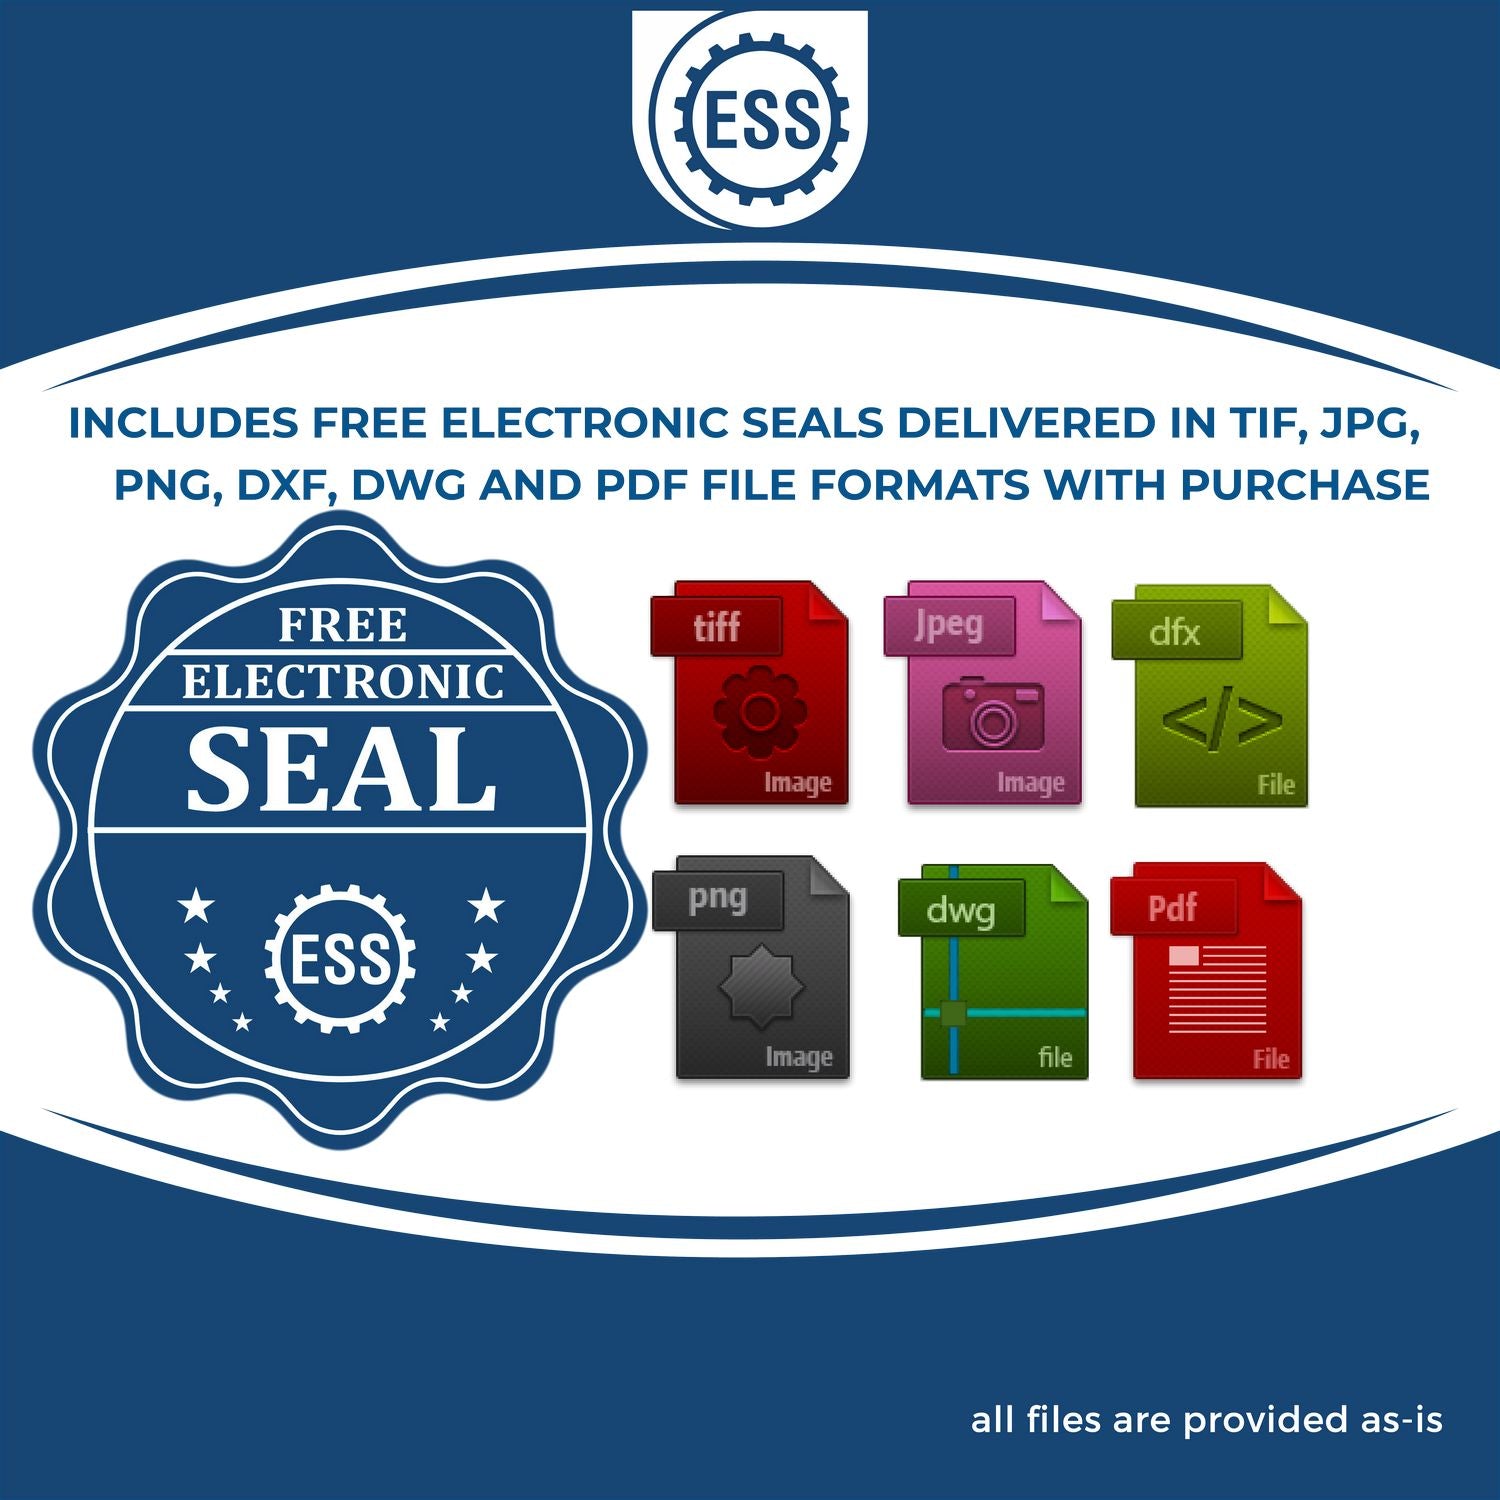 An infographic for the free electronic seal for the Gift Wisconsin Landscape Architect Seal illustrating the different file type icons such as DXF, DWG, TIF, JPG and PNG.